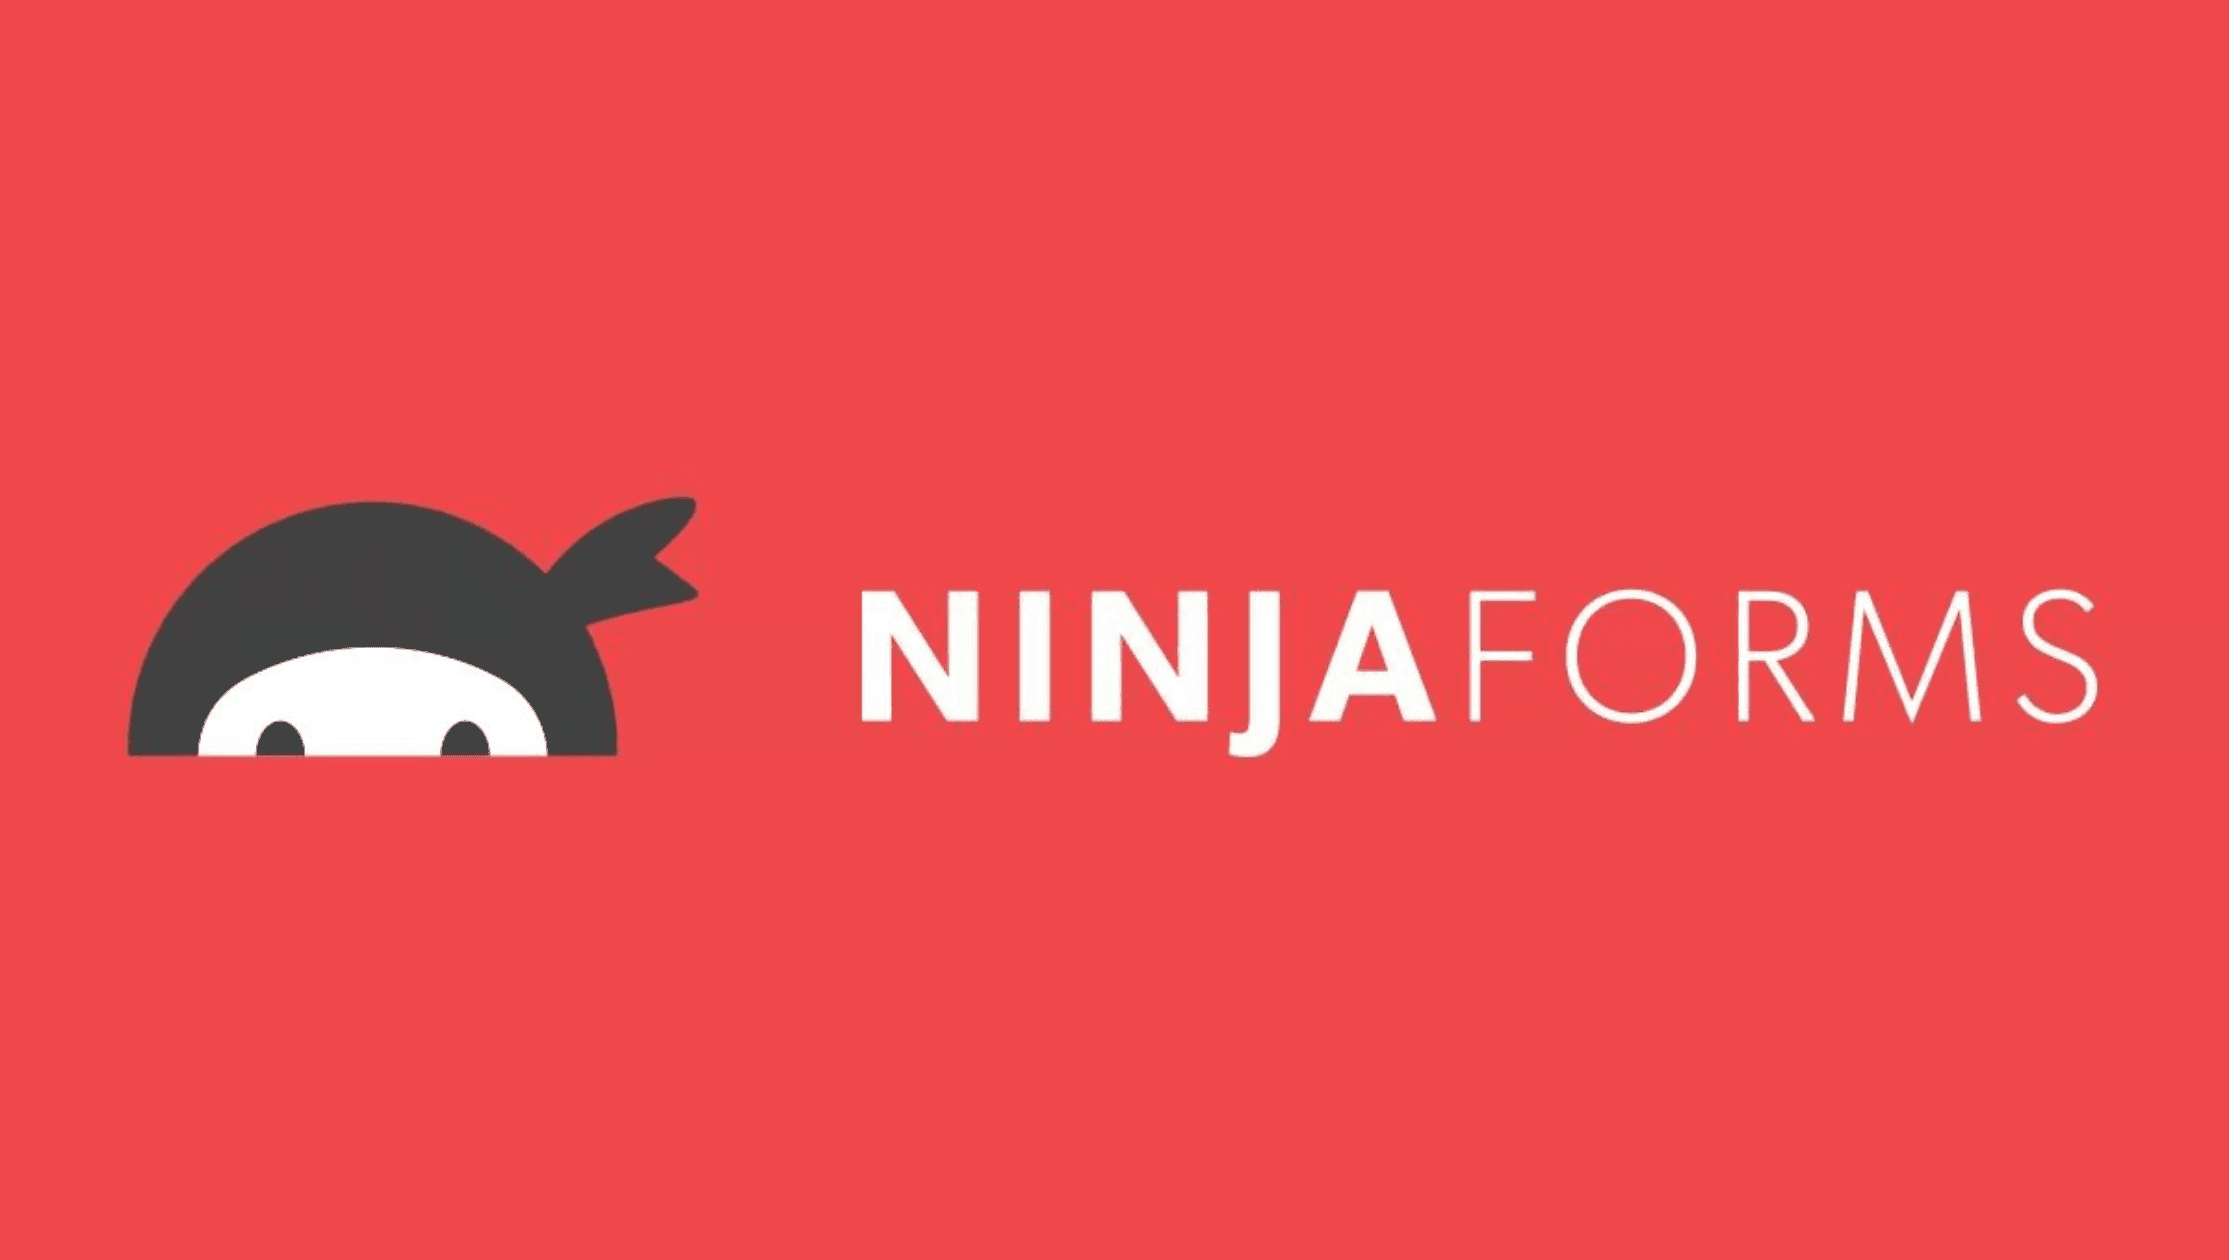 How To Fix A Code Injection Vulnerability In Ninja Forms Wordpress Plugin